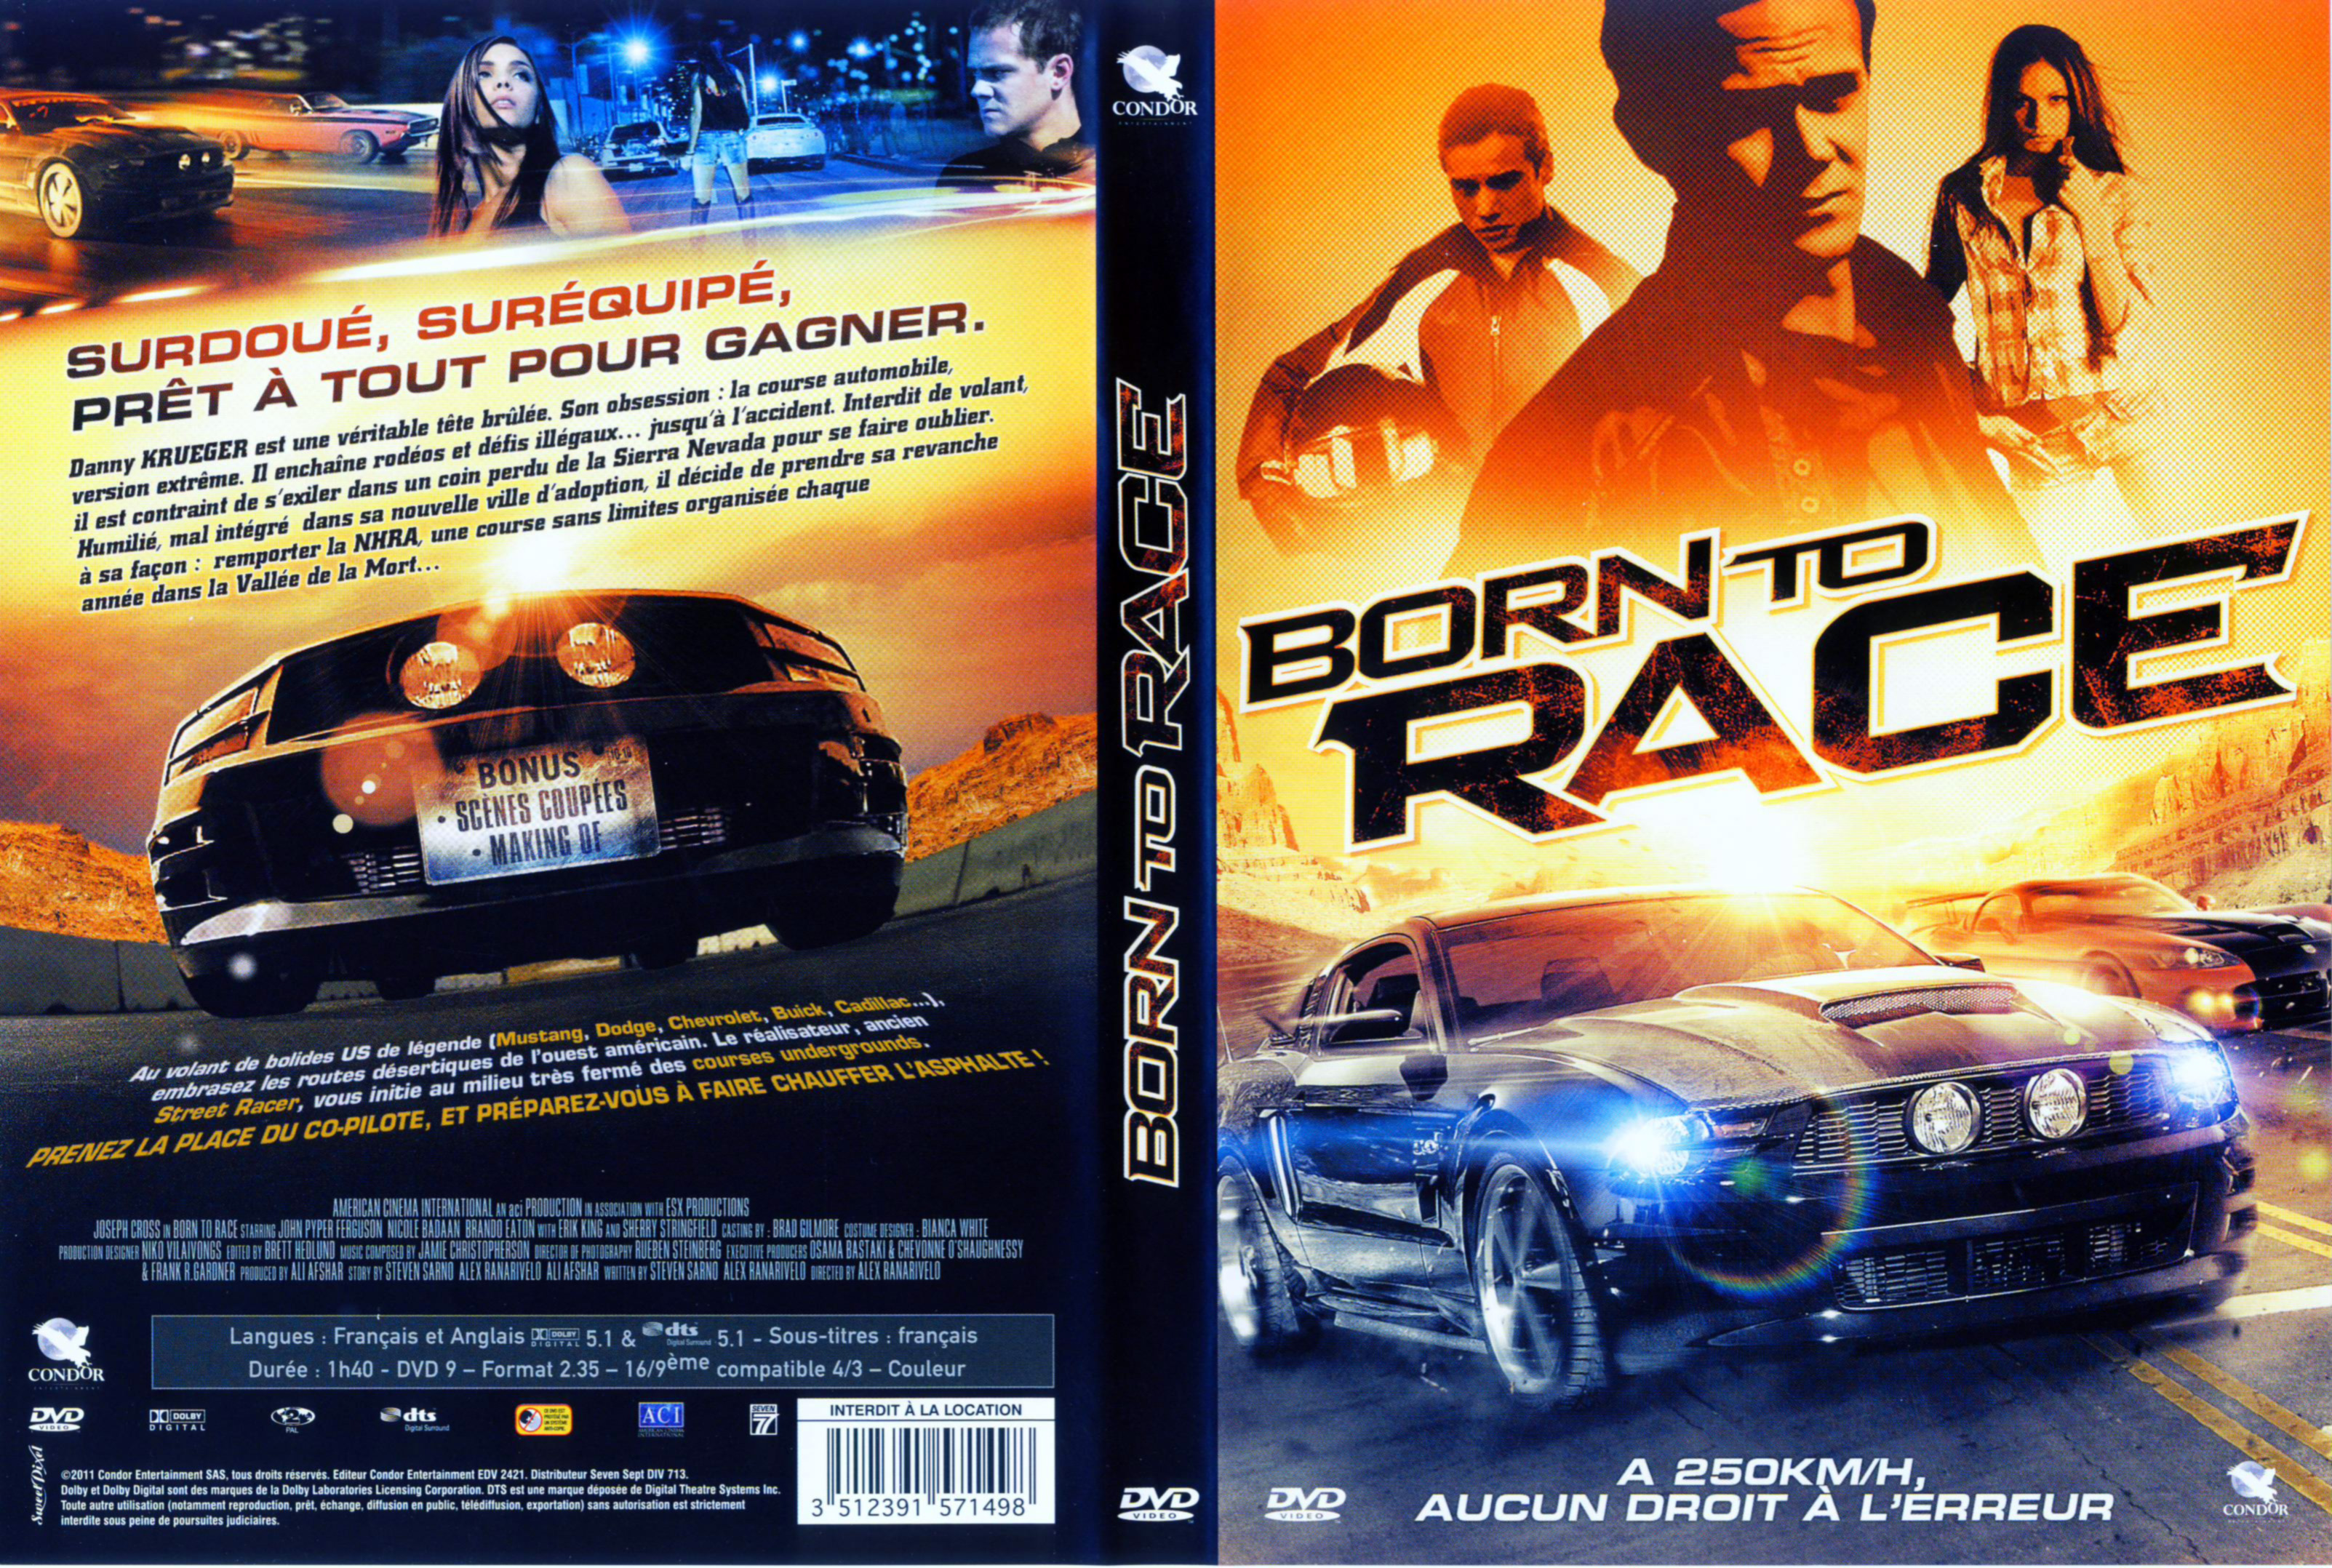 Jaquette DVD Born to race